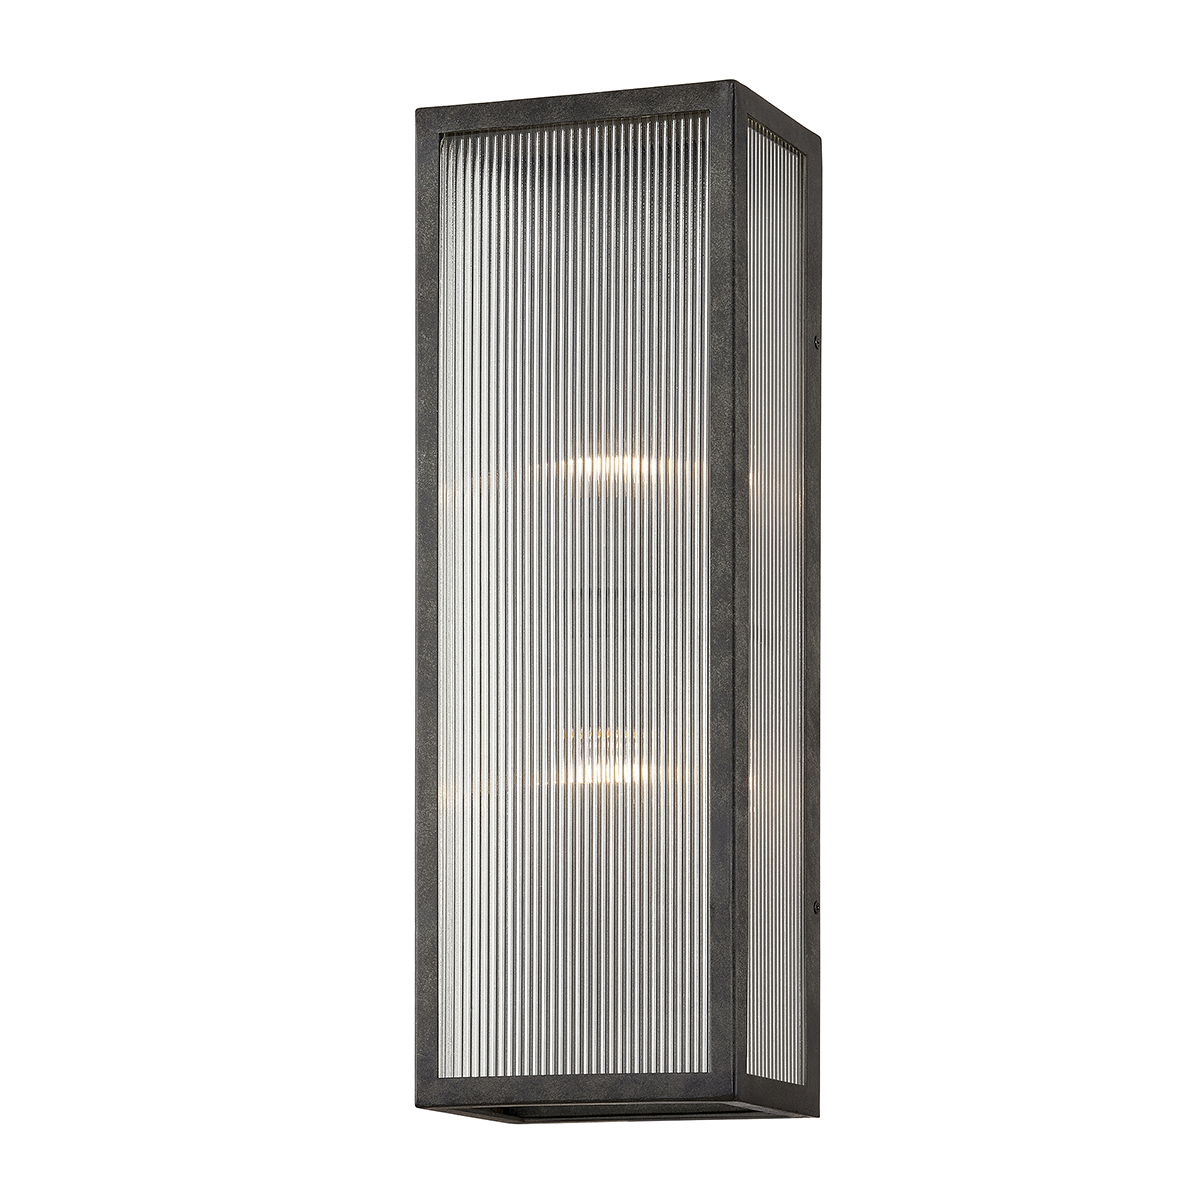 Troy Lighting TISONI 2LT WALL B7393 Outdoor l Wall Troy Lighting FRENCH IRON  